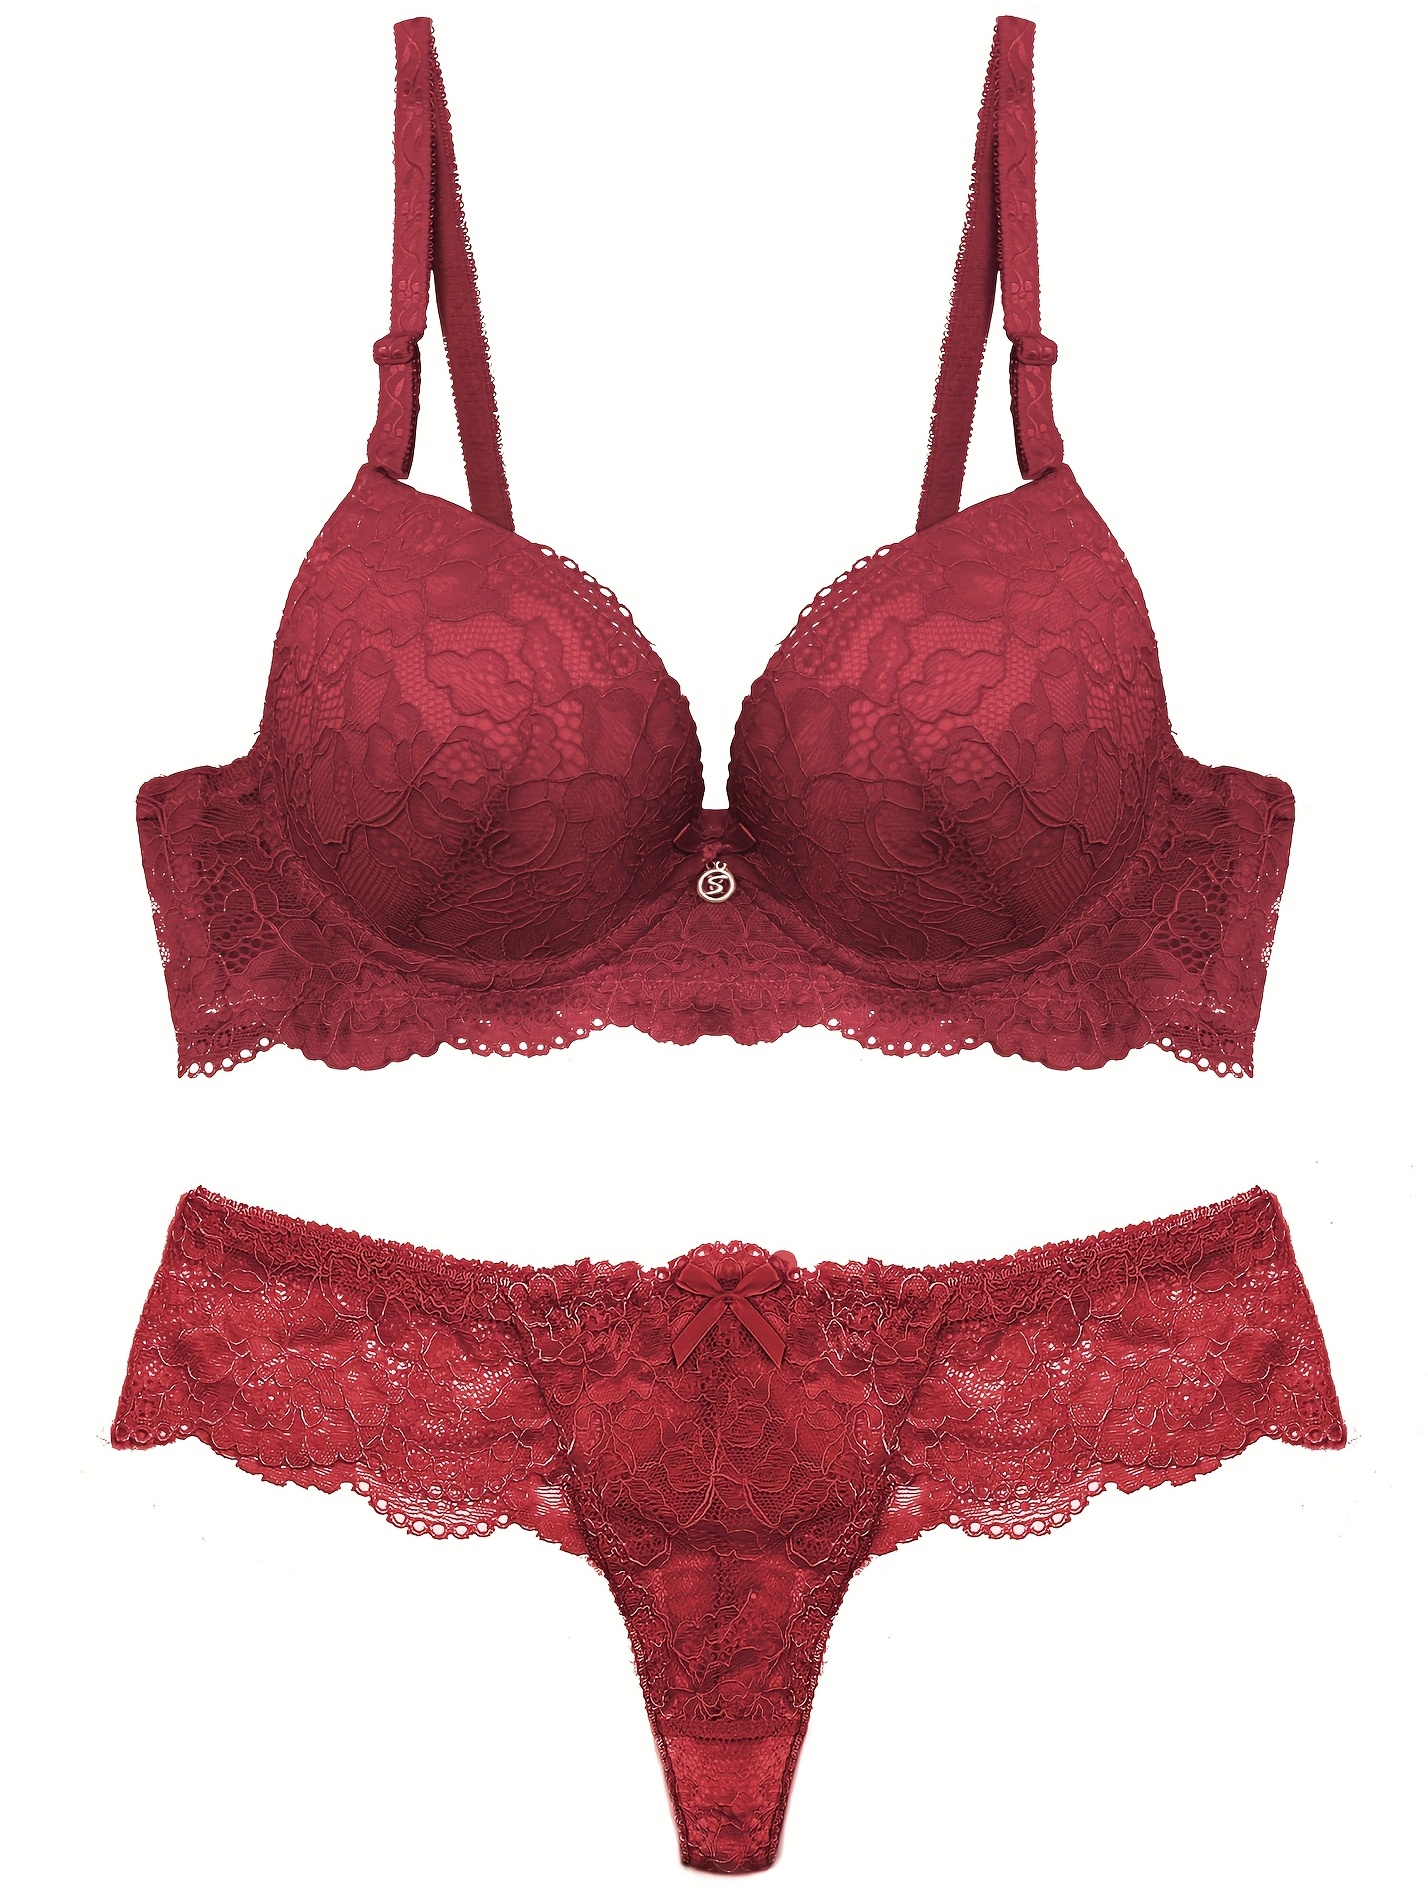 Foto de Beautiful, sexy red lace bra with panties, white beads and heart  shape chocolates in box. Underwear set gift for woman from beloved.  Romantic lingerie for Valentine's day temptation. Erotic concept.